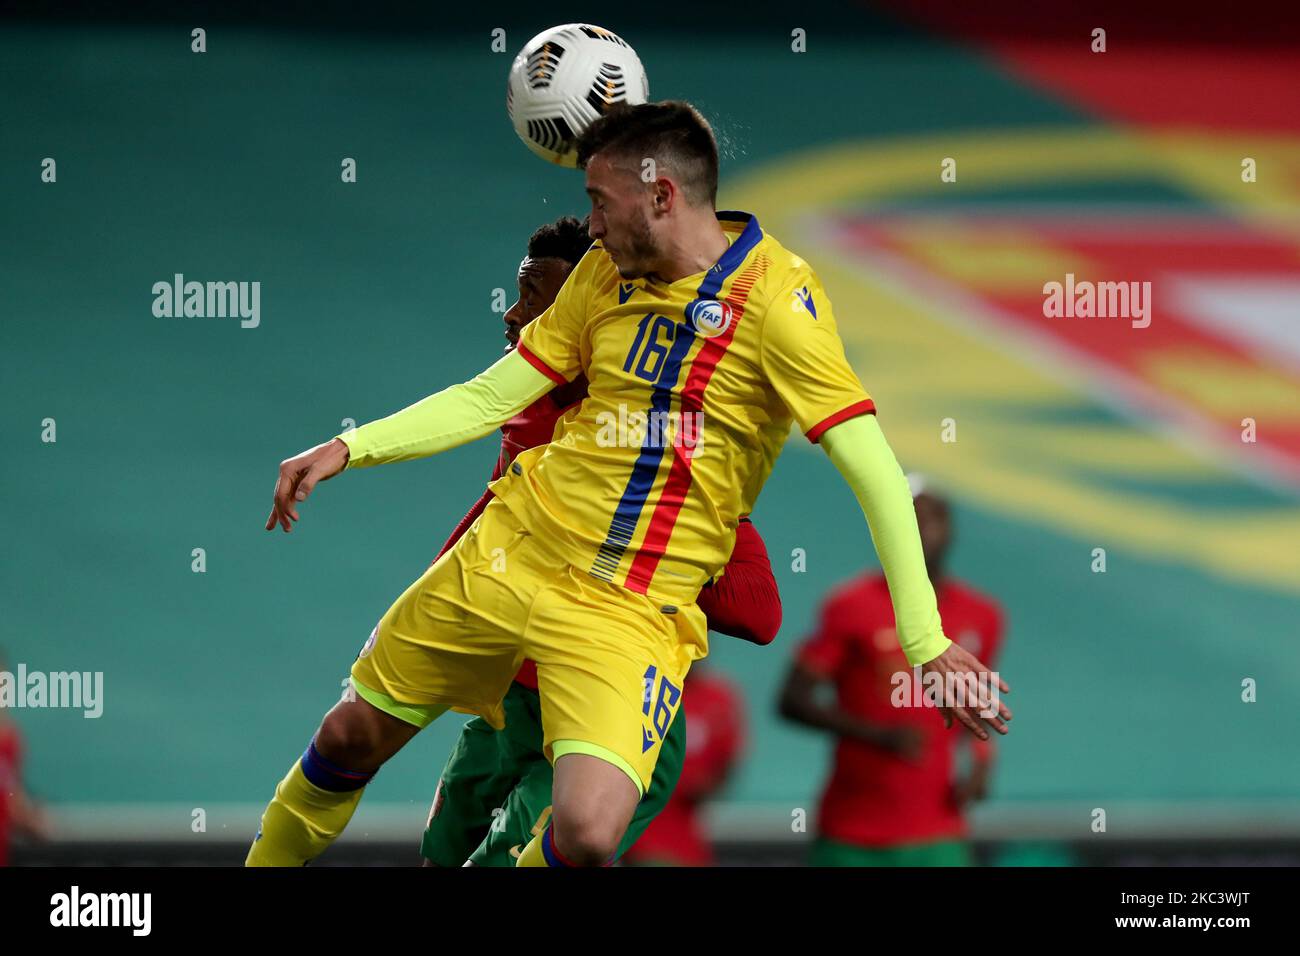 Alex Martnez of Andorra (R ) vies with Nelson Semedo of Portugal during the friendly football match between Portugal and Andorra, at the Luz stadium in Lisbon, Portugal, on November 11, 2020. (Photo by Pedro FiÃºza/NurPhoto) Stock Photo